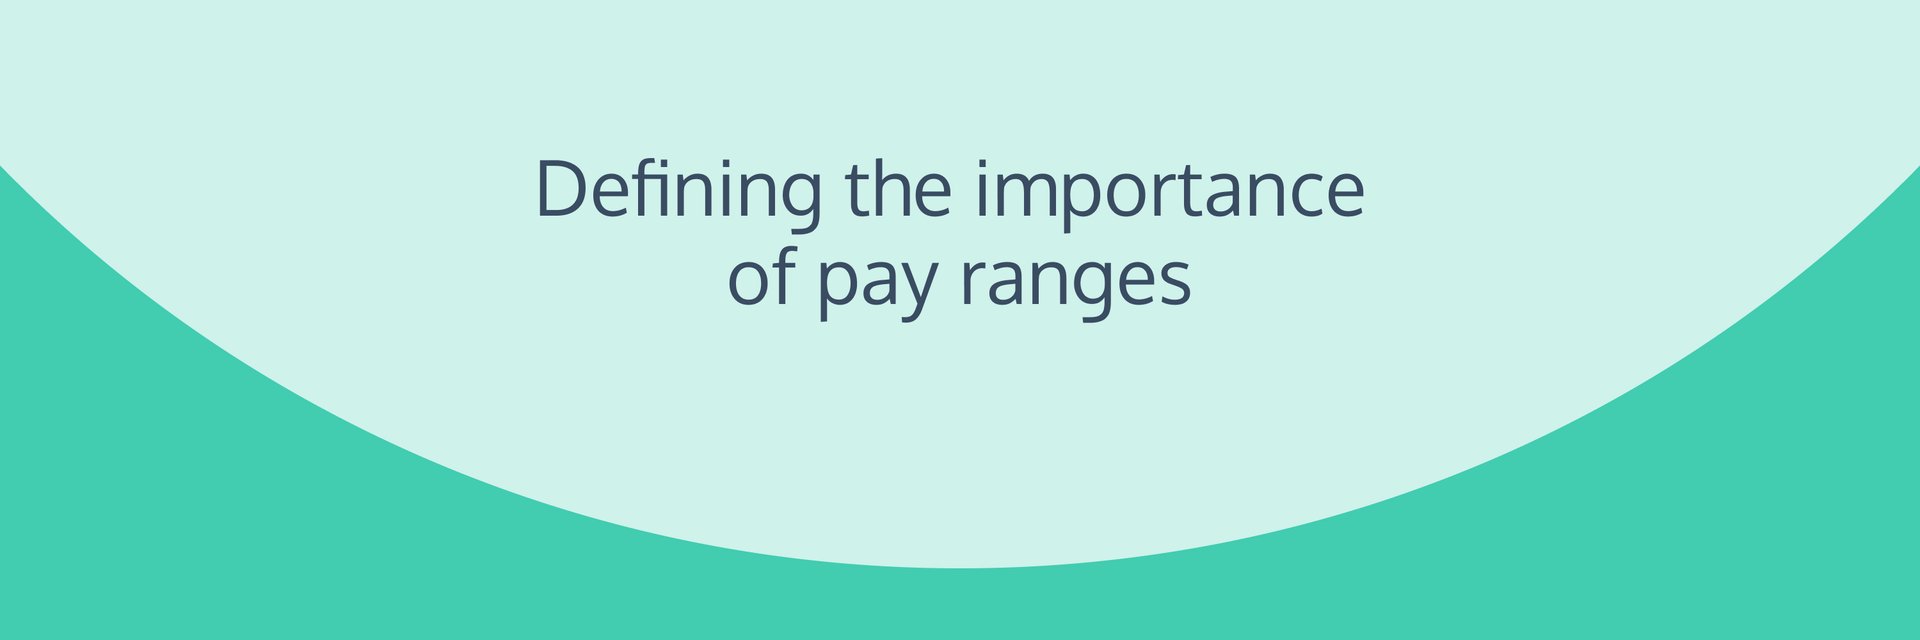 Defining the importance of pay ranges